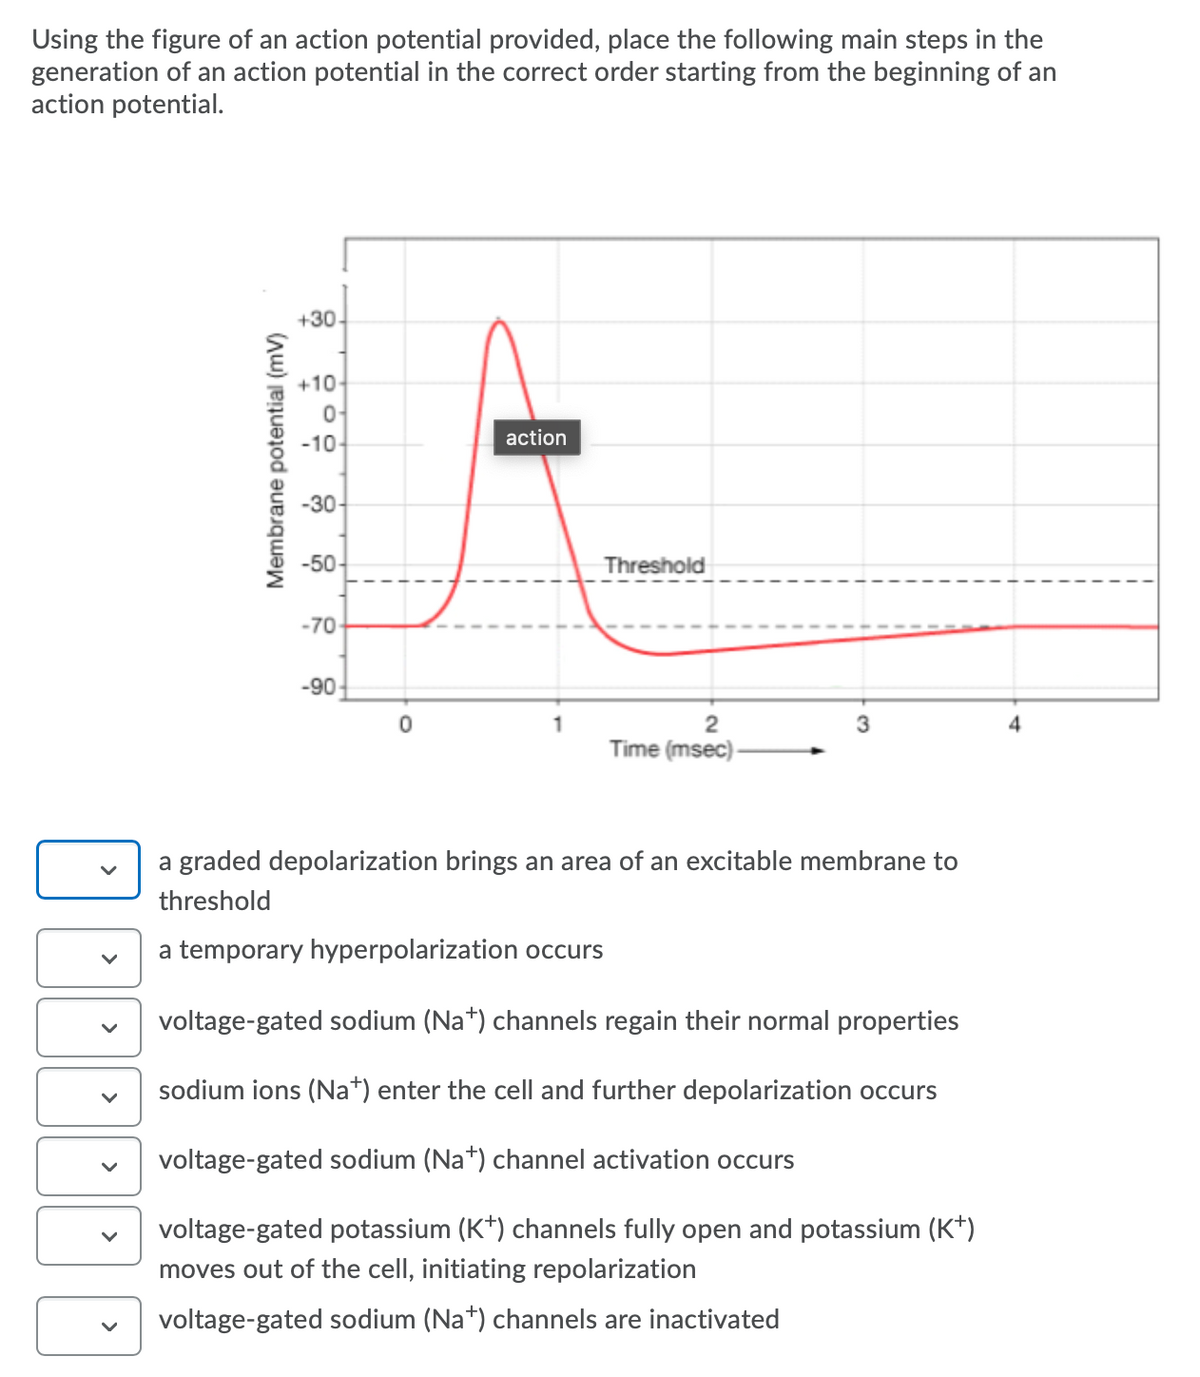 Using the figure of an action potential provided, place the following main steps in the
generation of an action potential in the correct order starting from the beginning of an
action potential.
+30-
+10-
-10-
action
-30-
-50-
Threshold
-70
-90-
3
Time (msec)
a graded depolarization brings an area of an excitable membrane to
threshold
a temporary hyperpolarization occurs
voltage-gated sodium (Na*) channels regain their normal properties
sodium ions (Na*) enter the cell and further depolarization occurs
voltage-gated sodium (Na*) channel activation occurs
voltage-gated potassium (K*) channels fully open and potassium (K*)
moves out of the cell, initiating repolarization
voltage-gated sodium (Na*) channels are inactivated
Membrane potential (mV)
>
>
>
>
>
